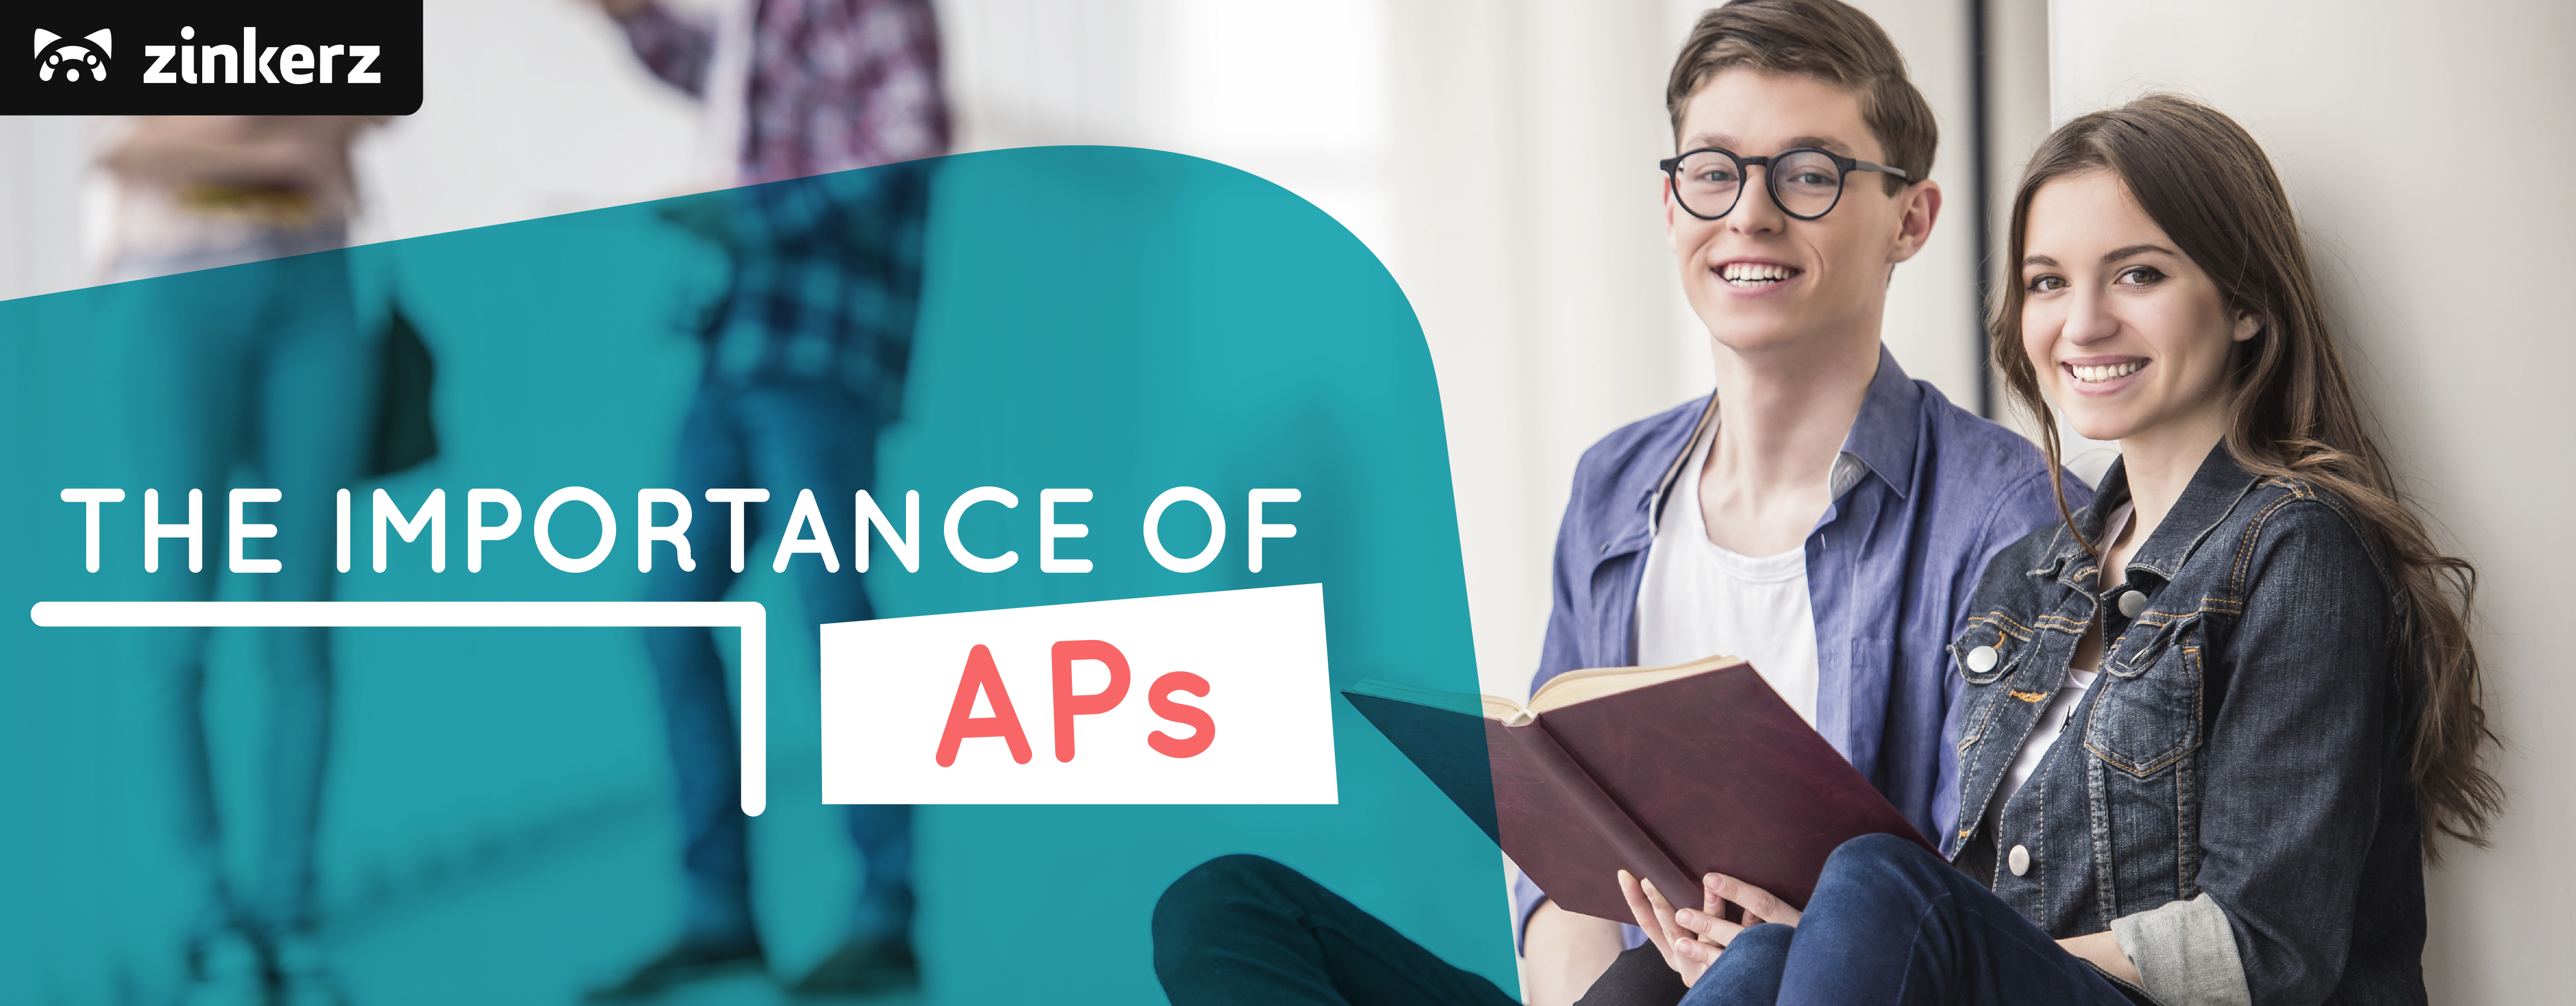 The Importance of APs